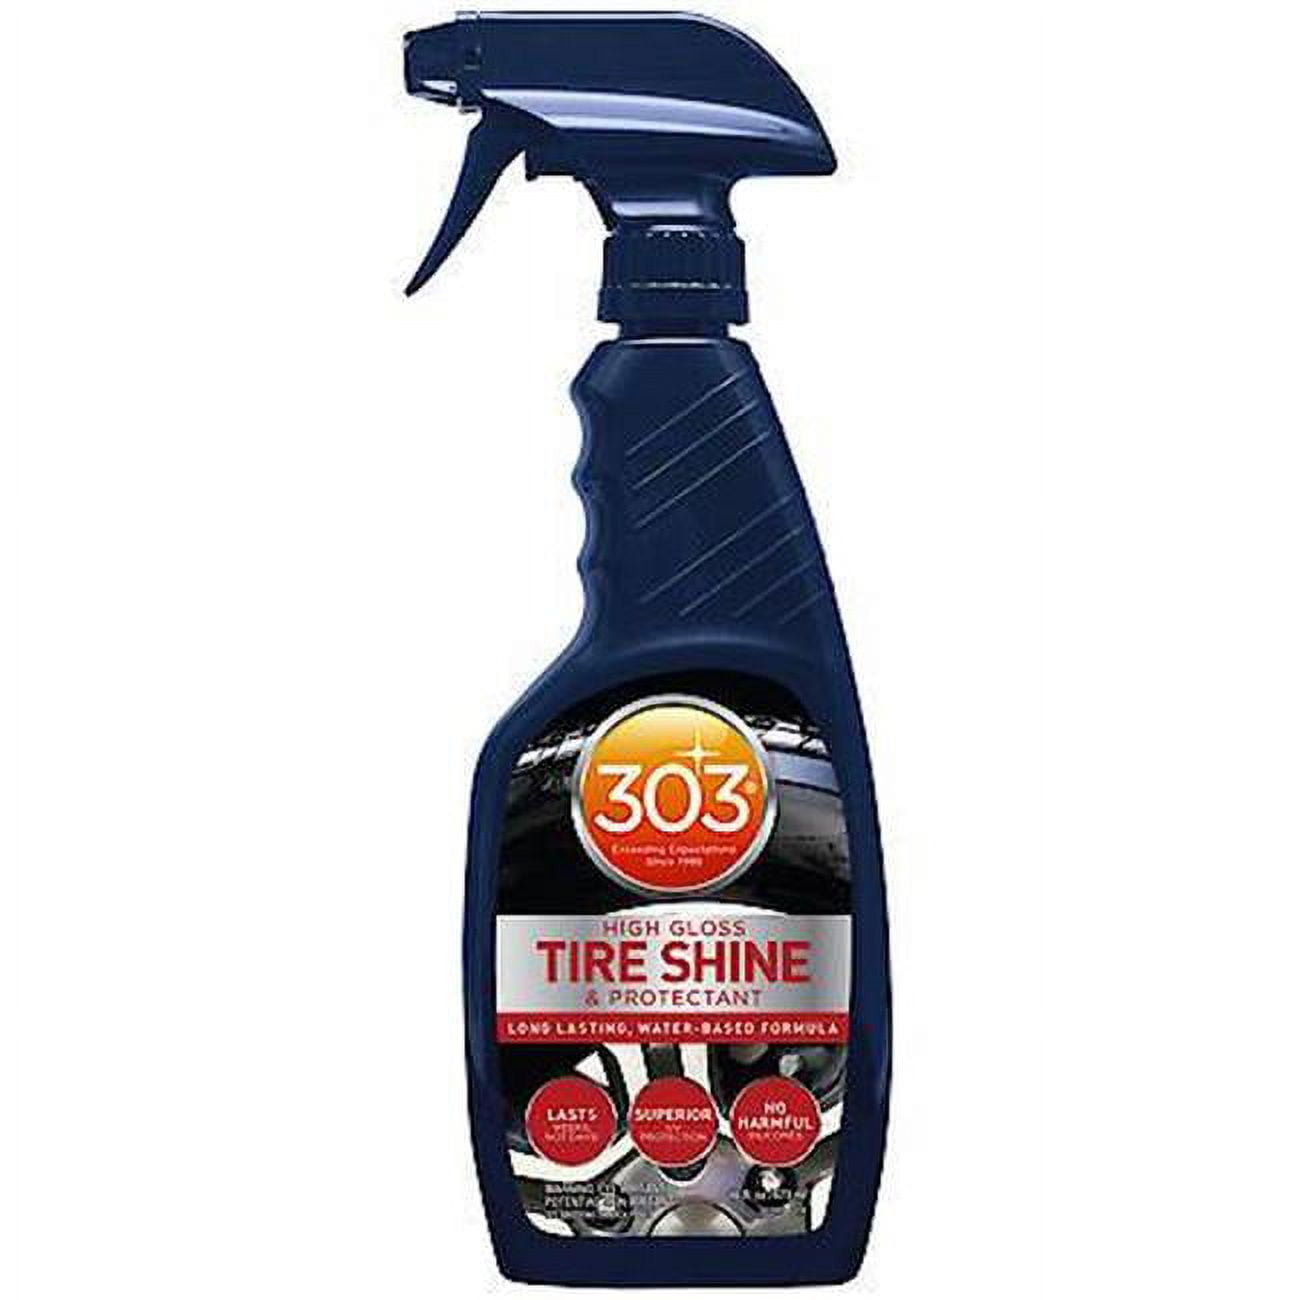 MOTHERS 06524 VLR Vinyl Leather Rubber Care 6 PACK - Conditions